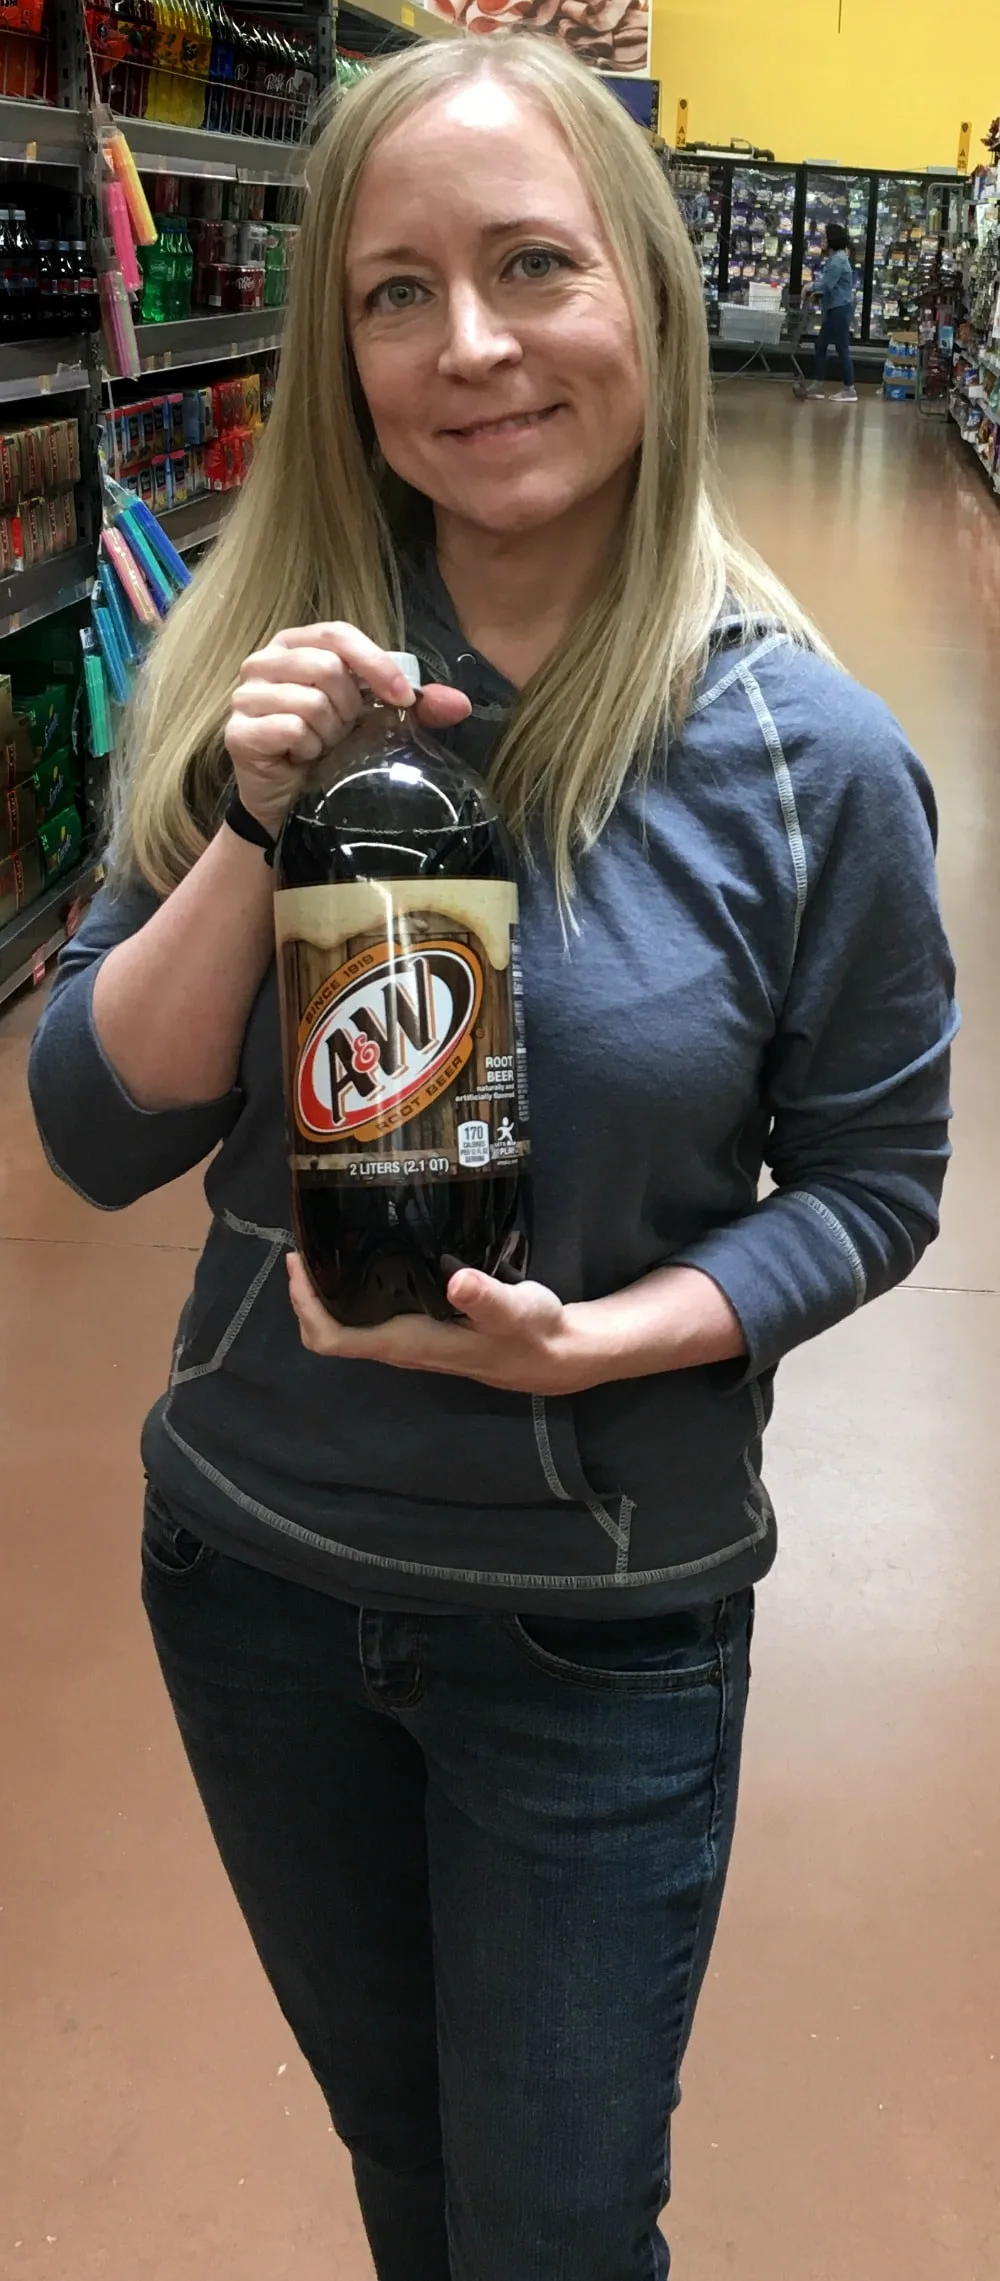 Jen Soltys buying A&W Root Beer from Walmart.